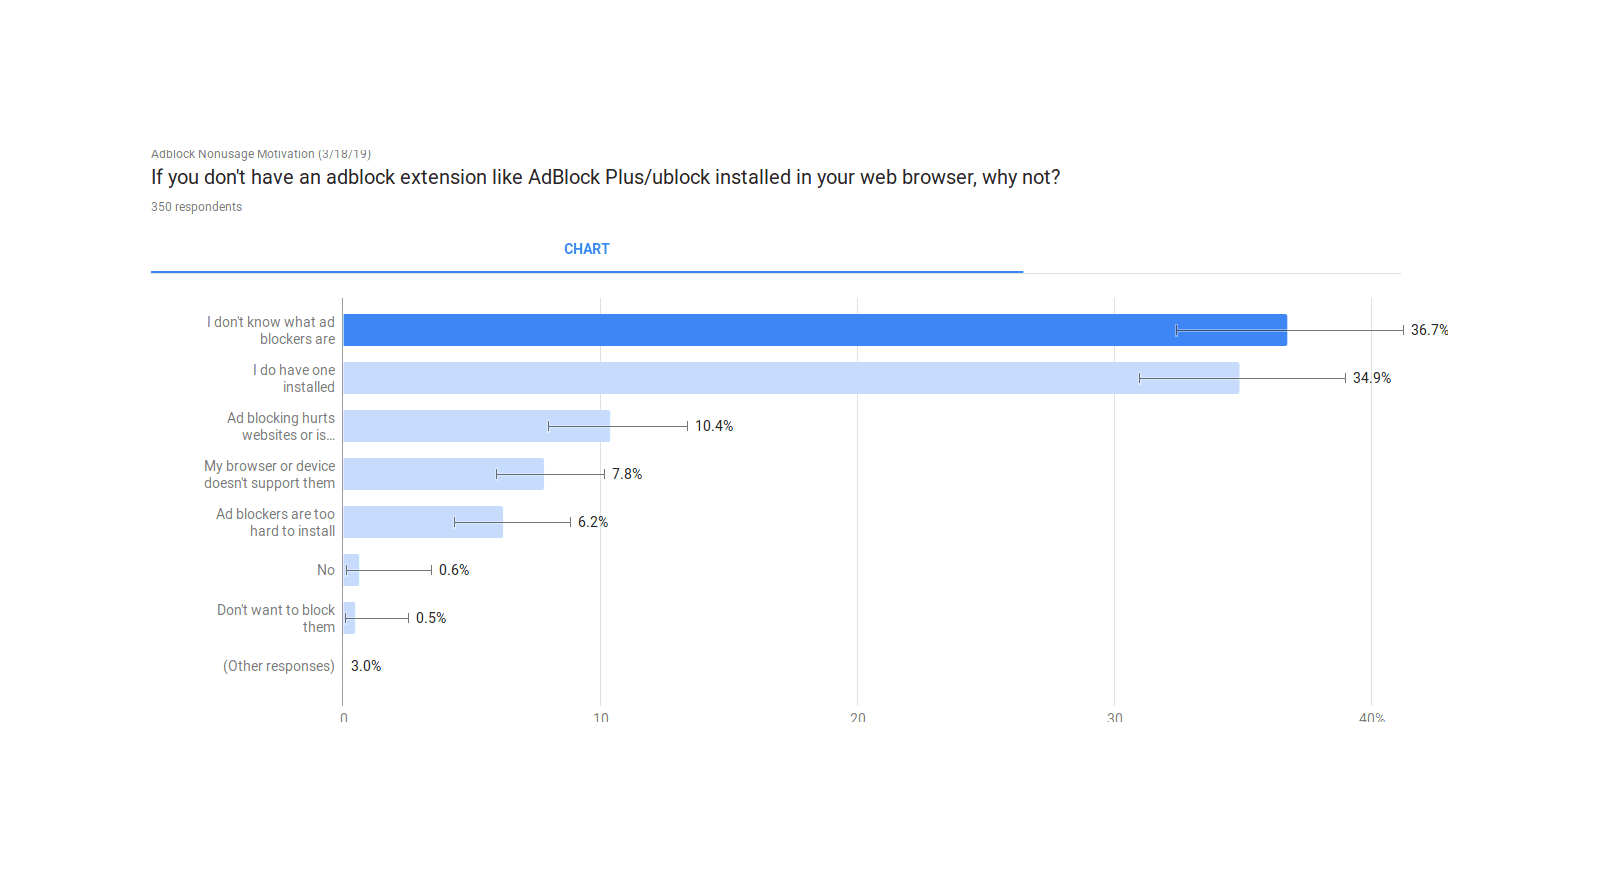 Second Google Survey about reasons for not using adblock: bar graph of results.